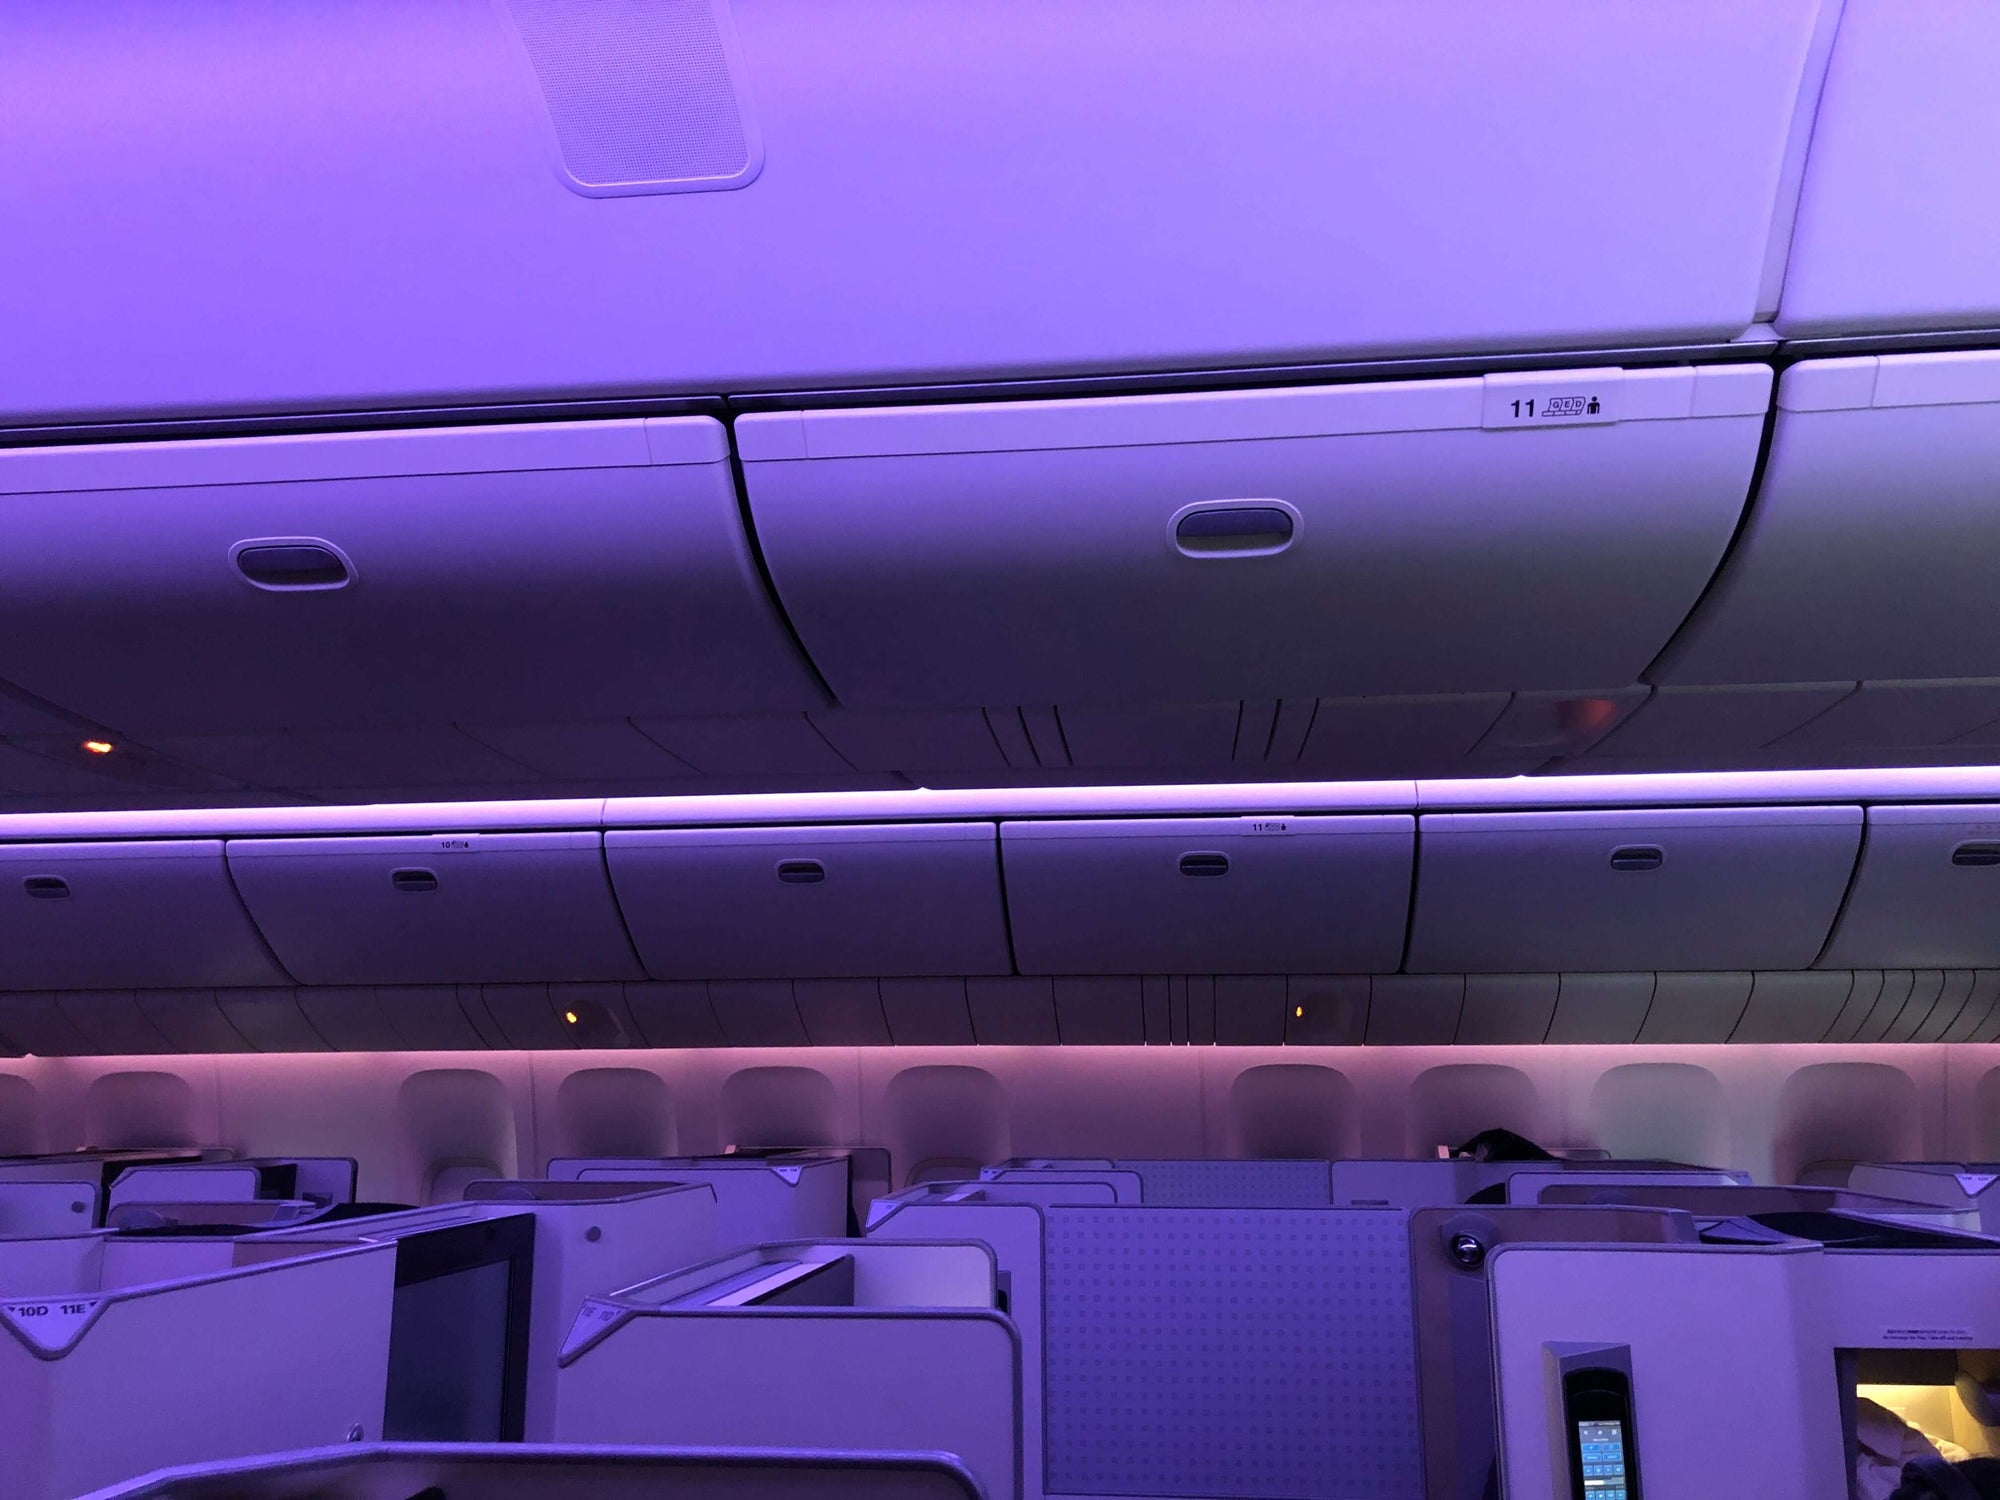 A purple-tinted image of seats in the first class cabin of an airplane.